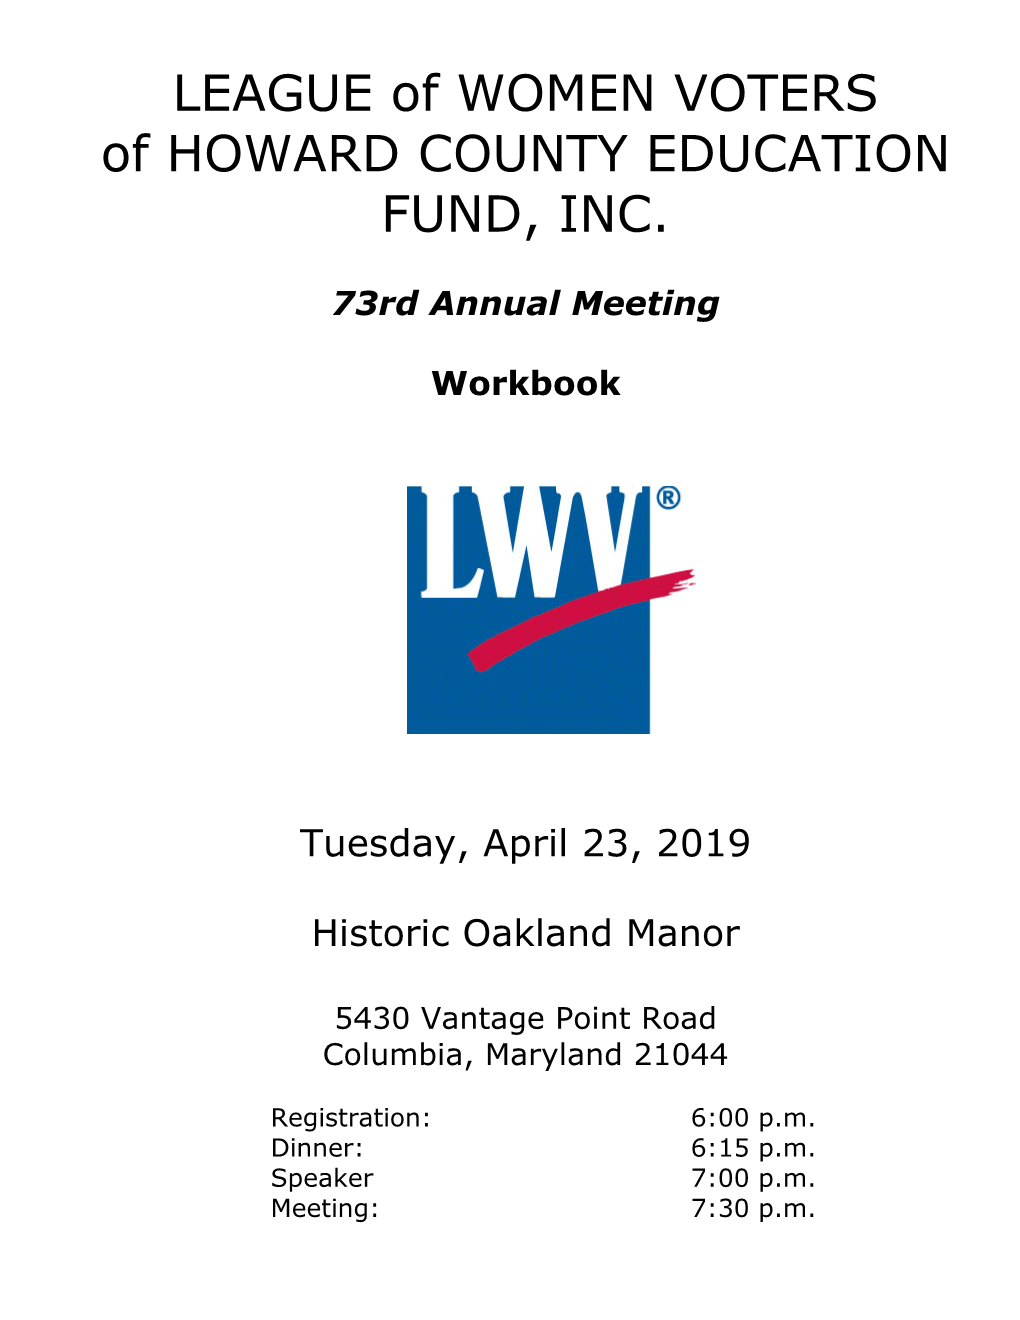 LEAGUE of WOMEN VOTERS of HOWARD COUNTY EDUCATION FUND, INC